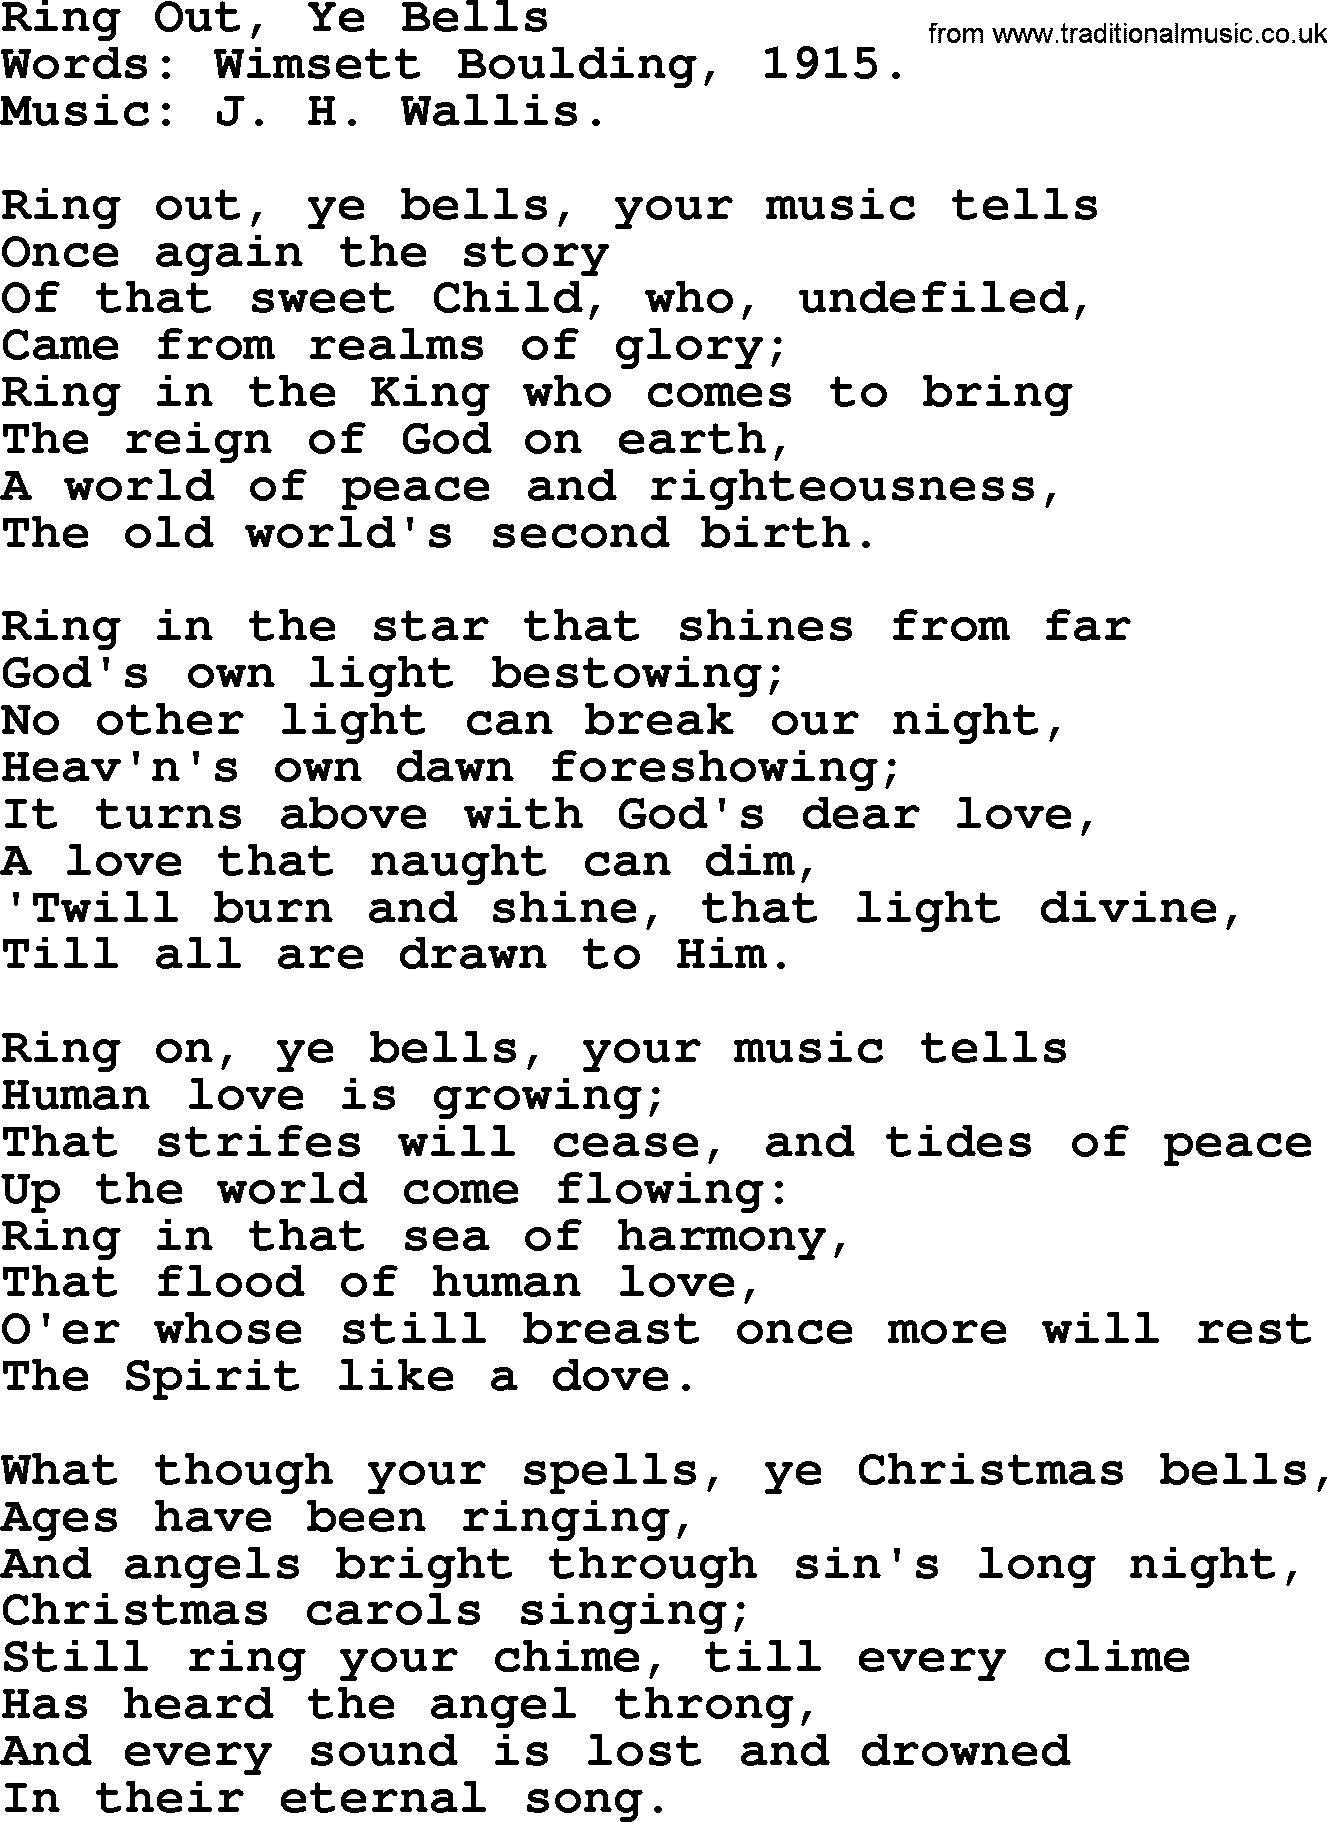 Christmas Hymns, Carols and Songs, title: Ring Out, Ye Bells, lyrics with PDF